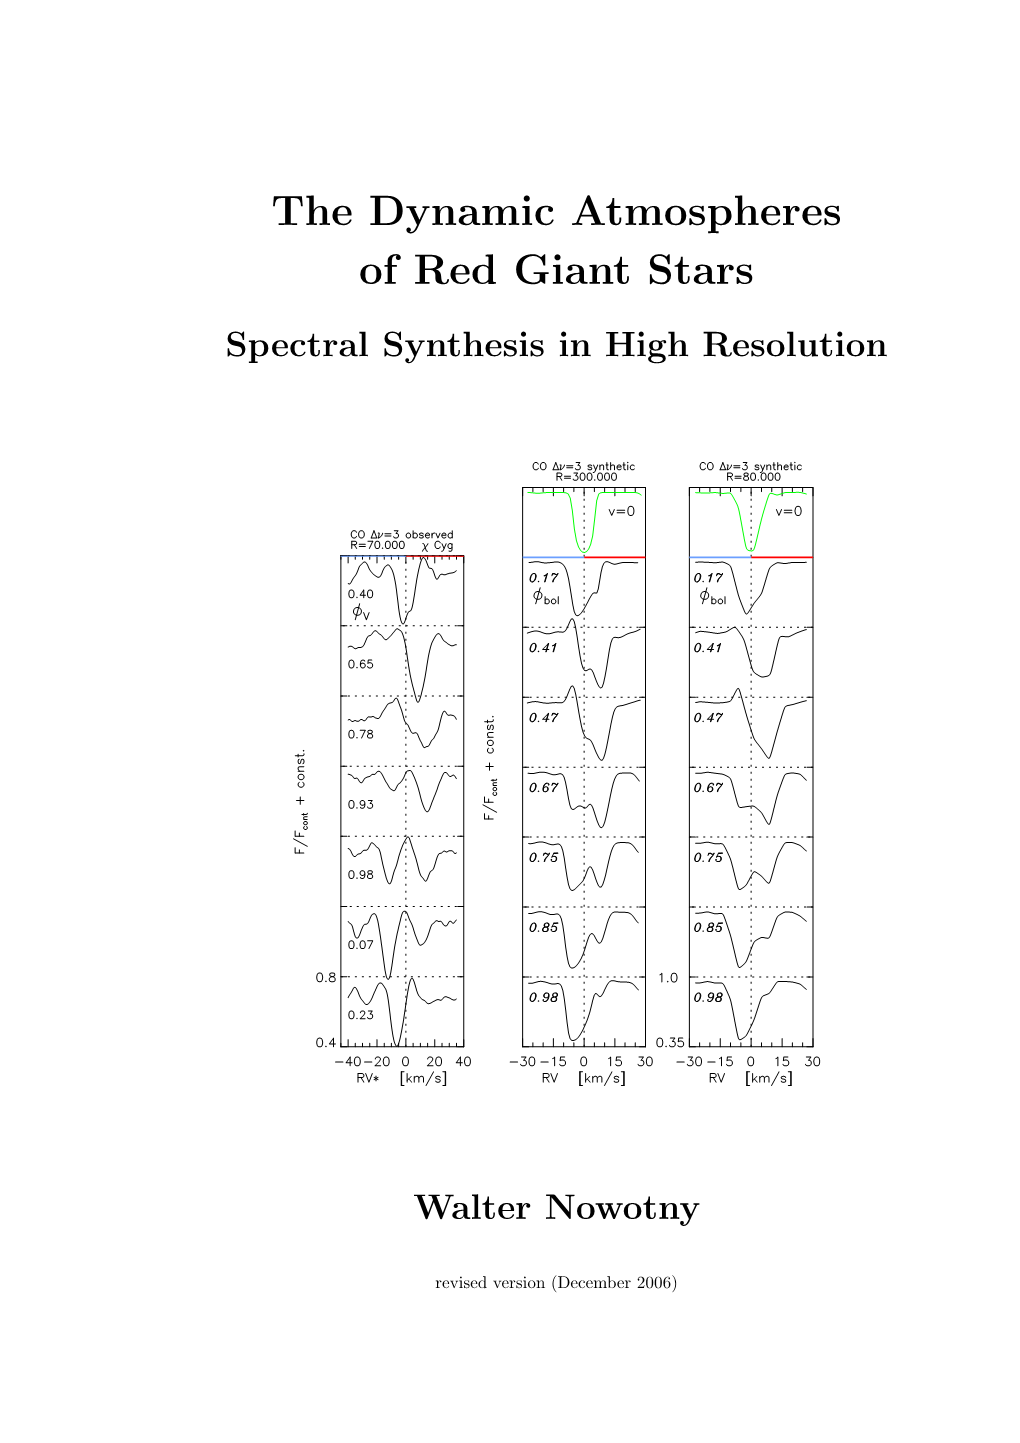 The Dynamic Atmospheres of Red Giant Stars